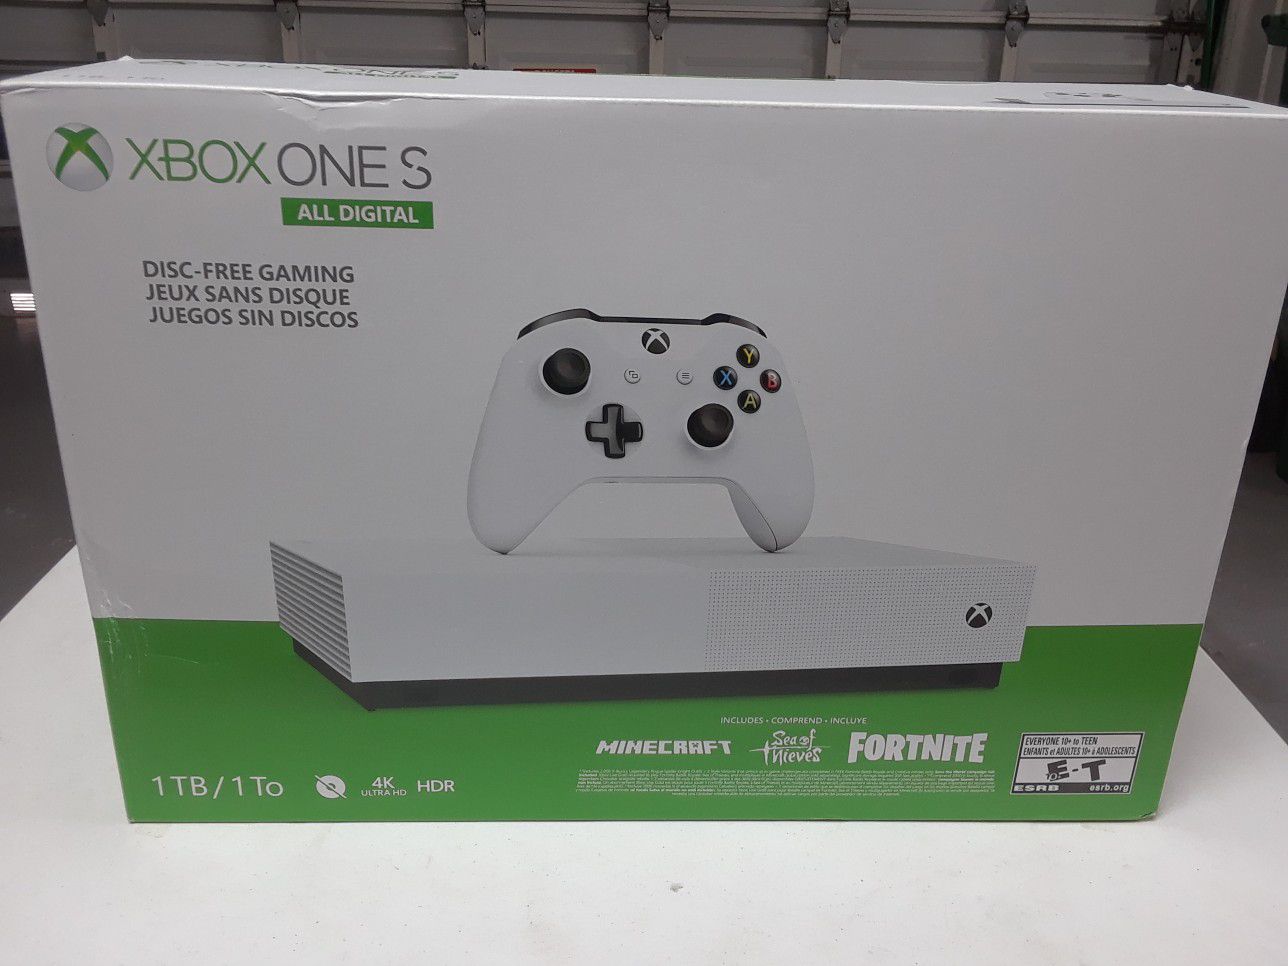 Sale XBox one s 1tb + 3 games (all digital)new and sealed